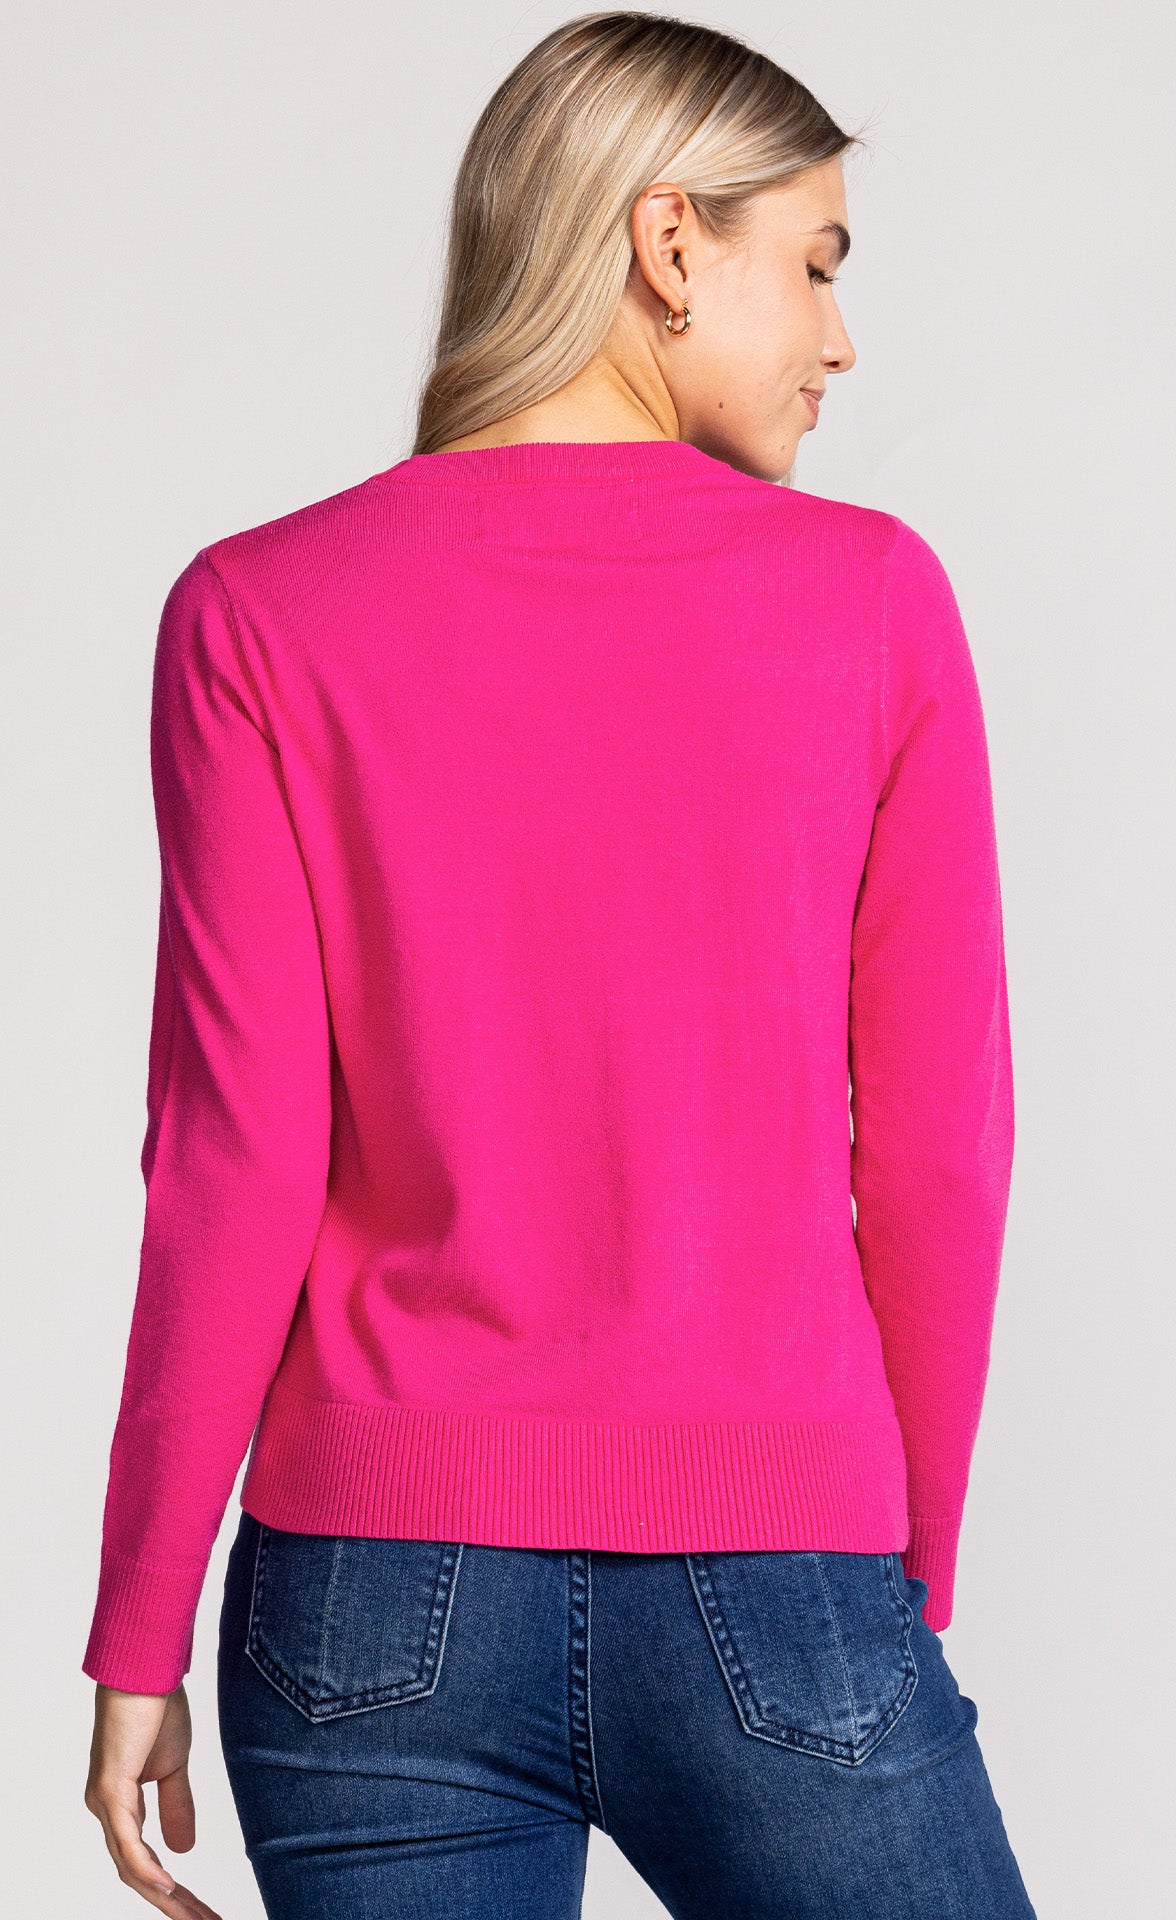 Emma Sweater Pink - Pink Martini Collection